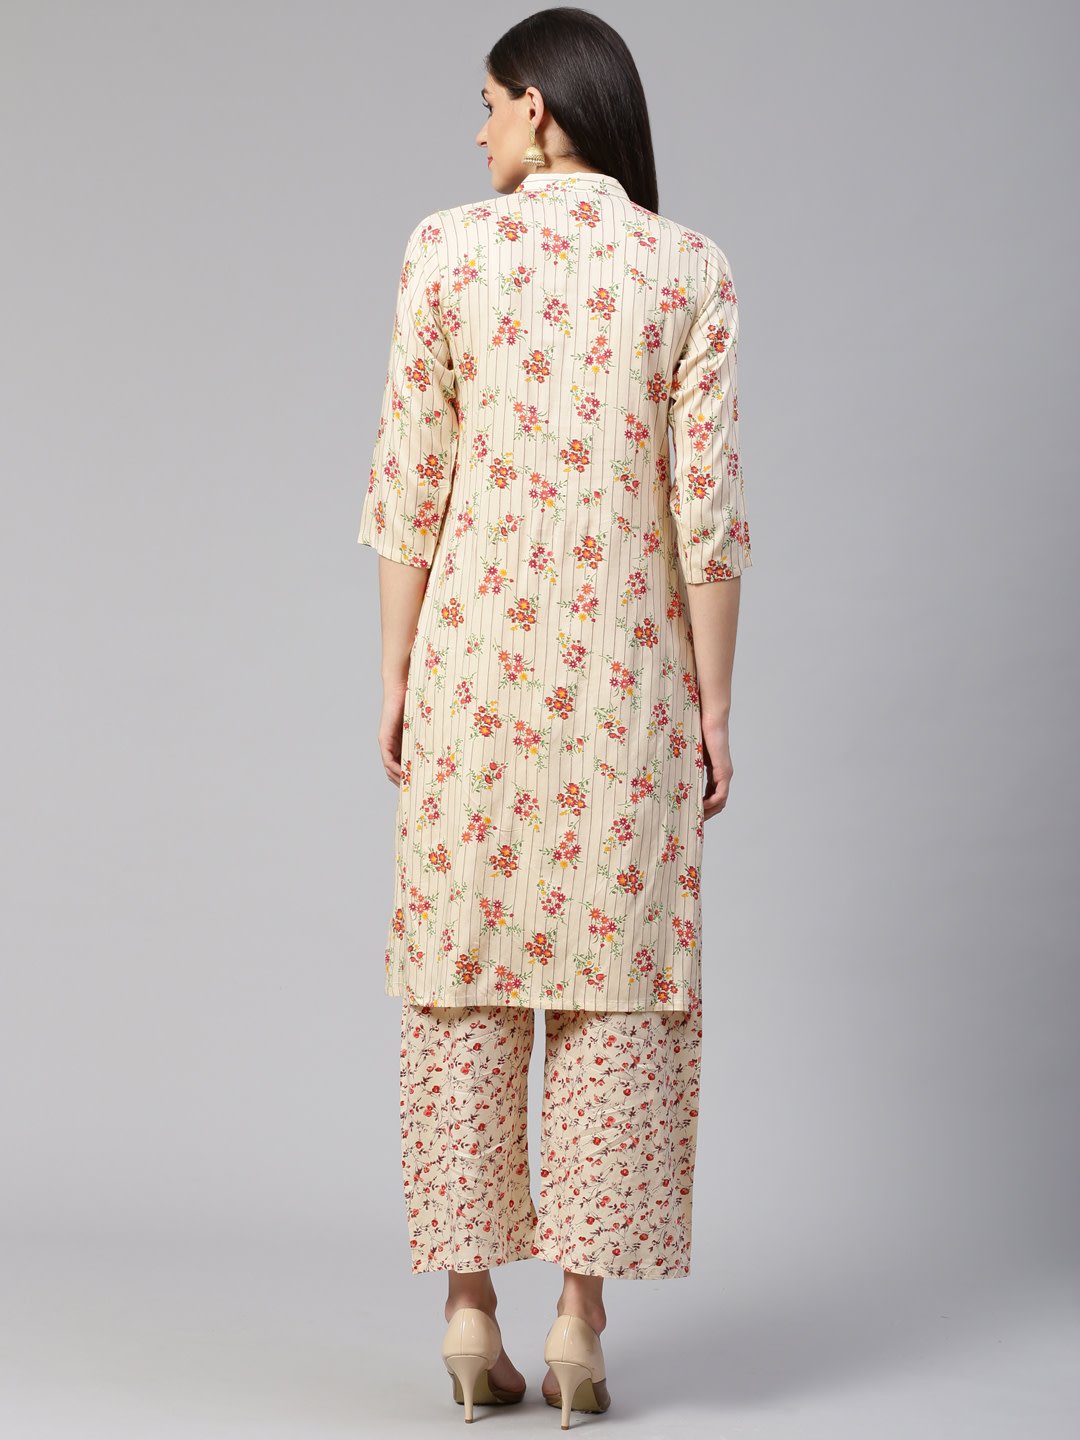 Women's Cream Coloured & Red Floral Print Kurta with Palazzos - Jompers